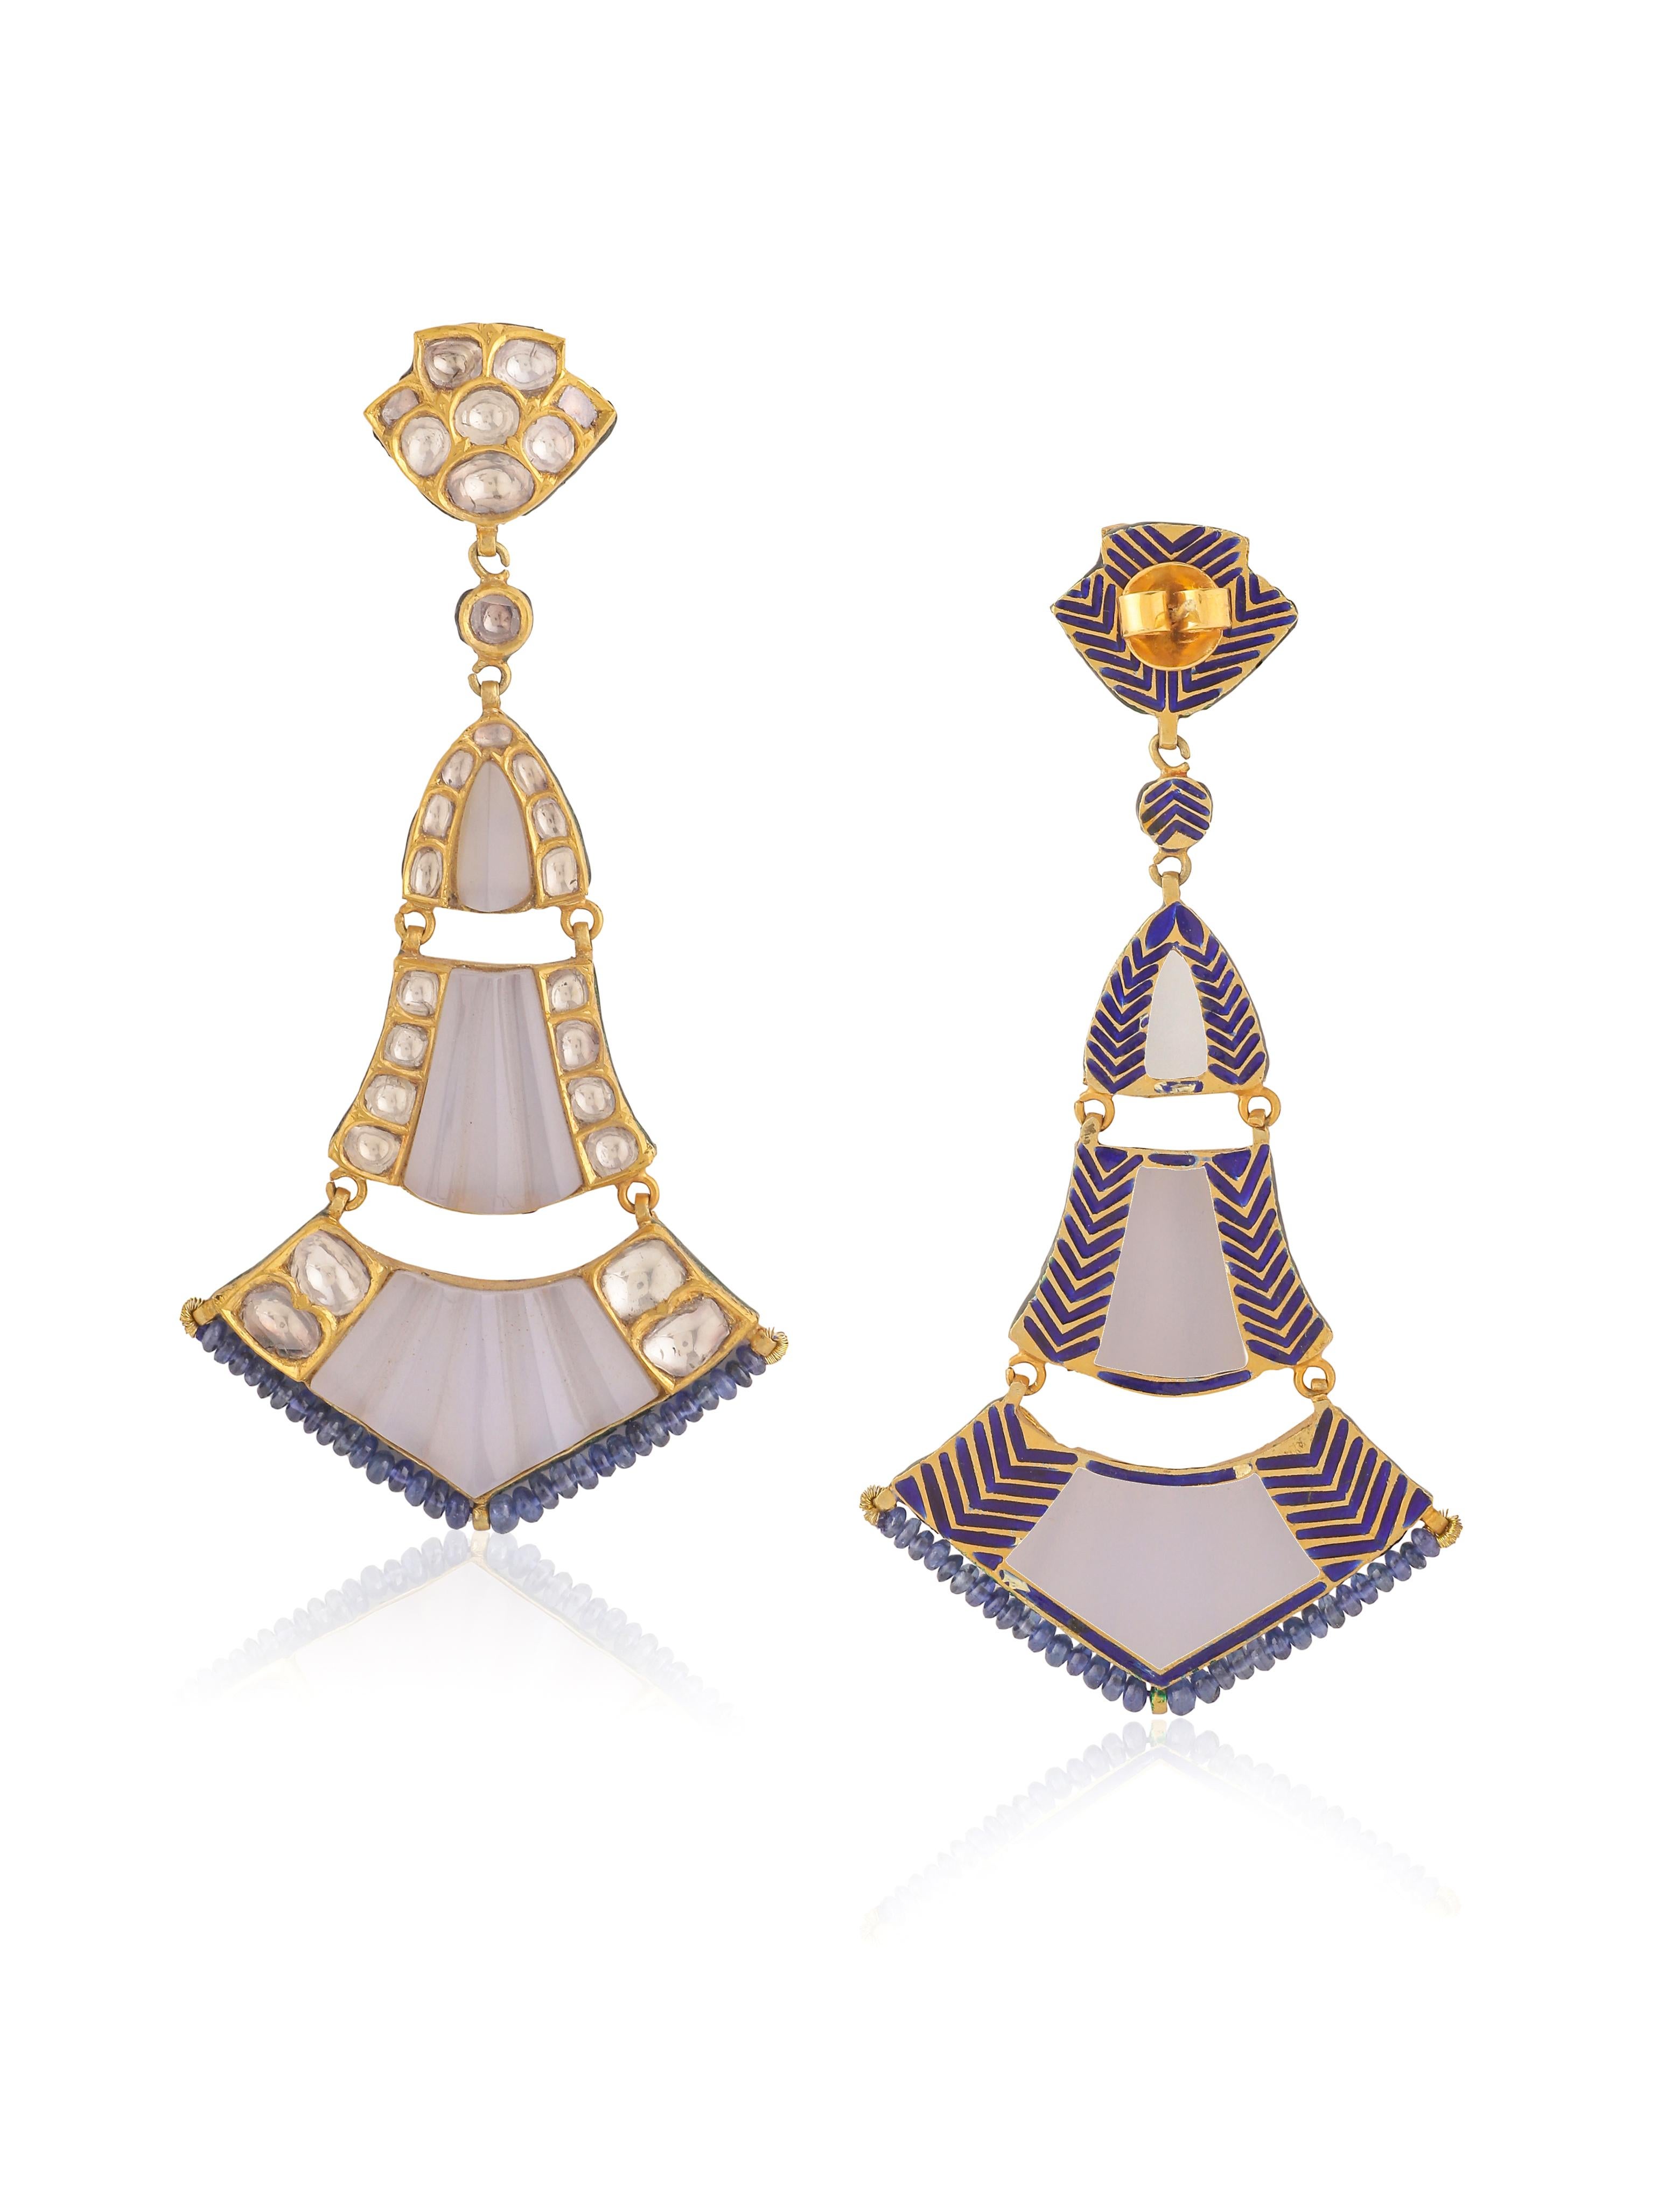 Art Deco 18k Gold Chandelier Earrings with Diamonds, Carved Chalcedony and Sapphire Beads For Sale